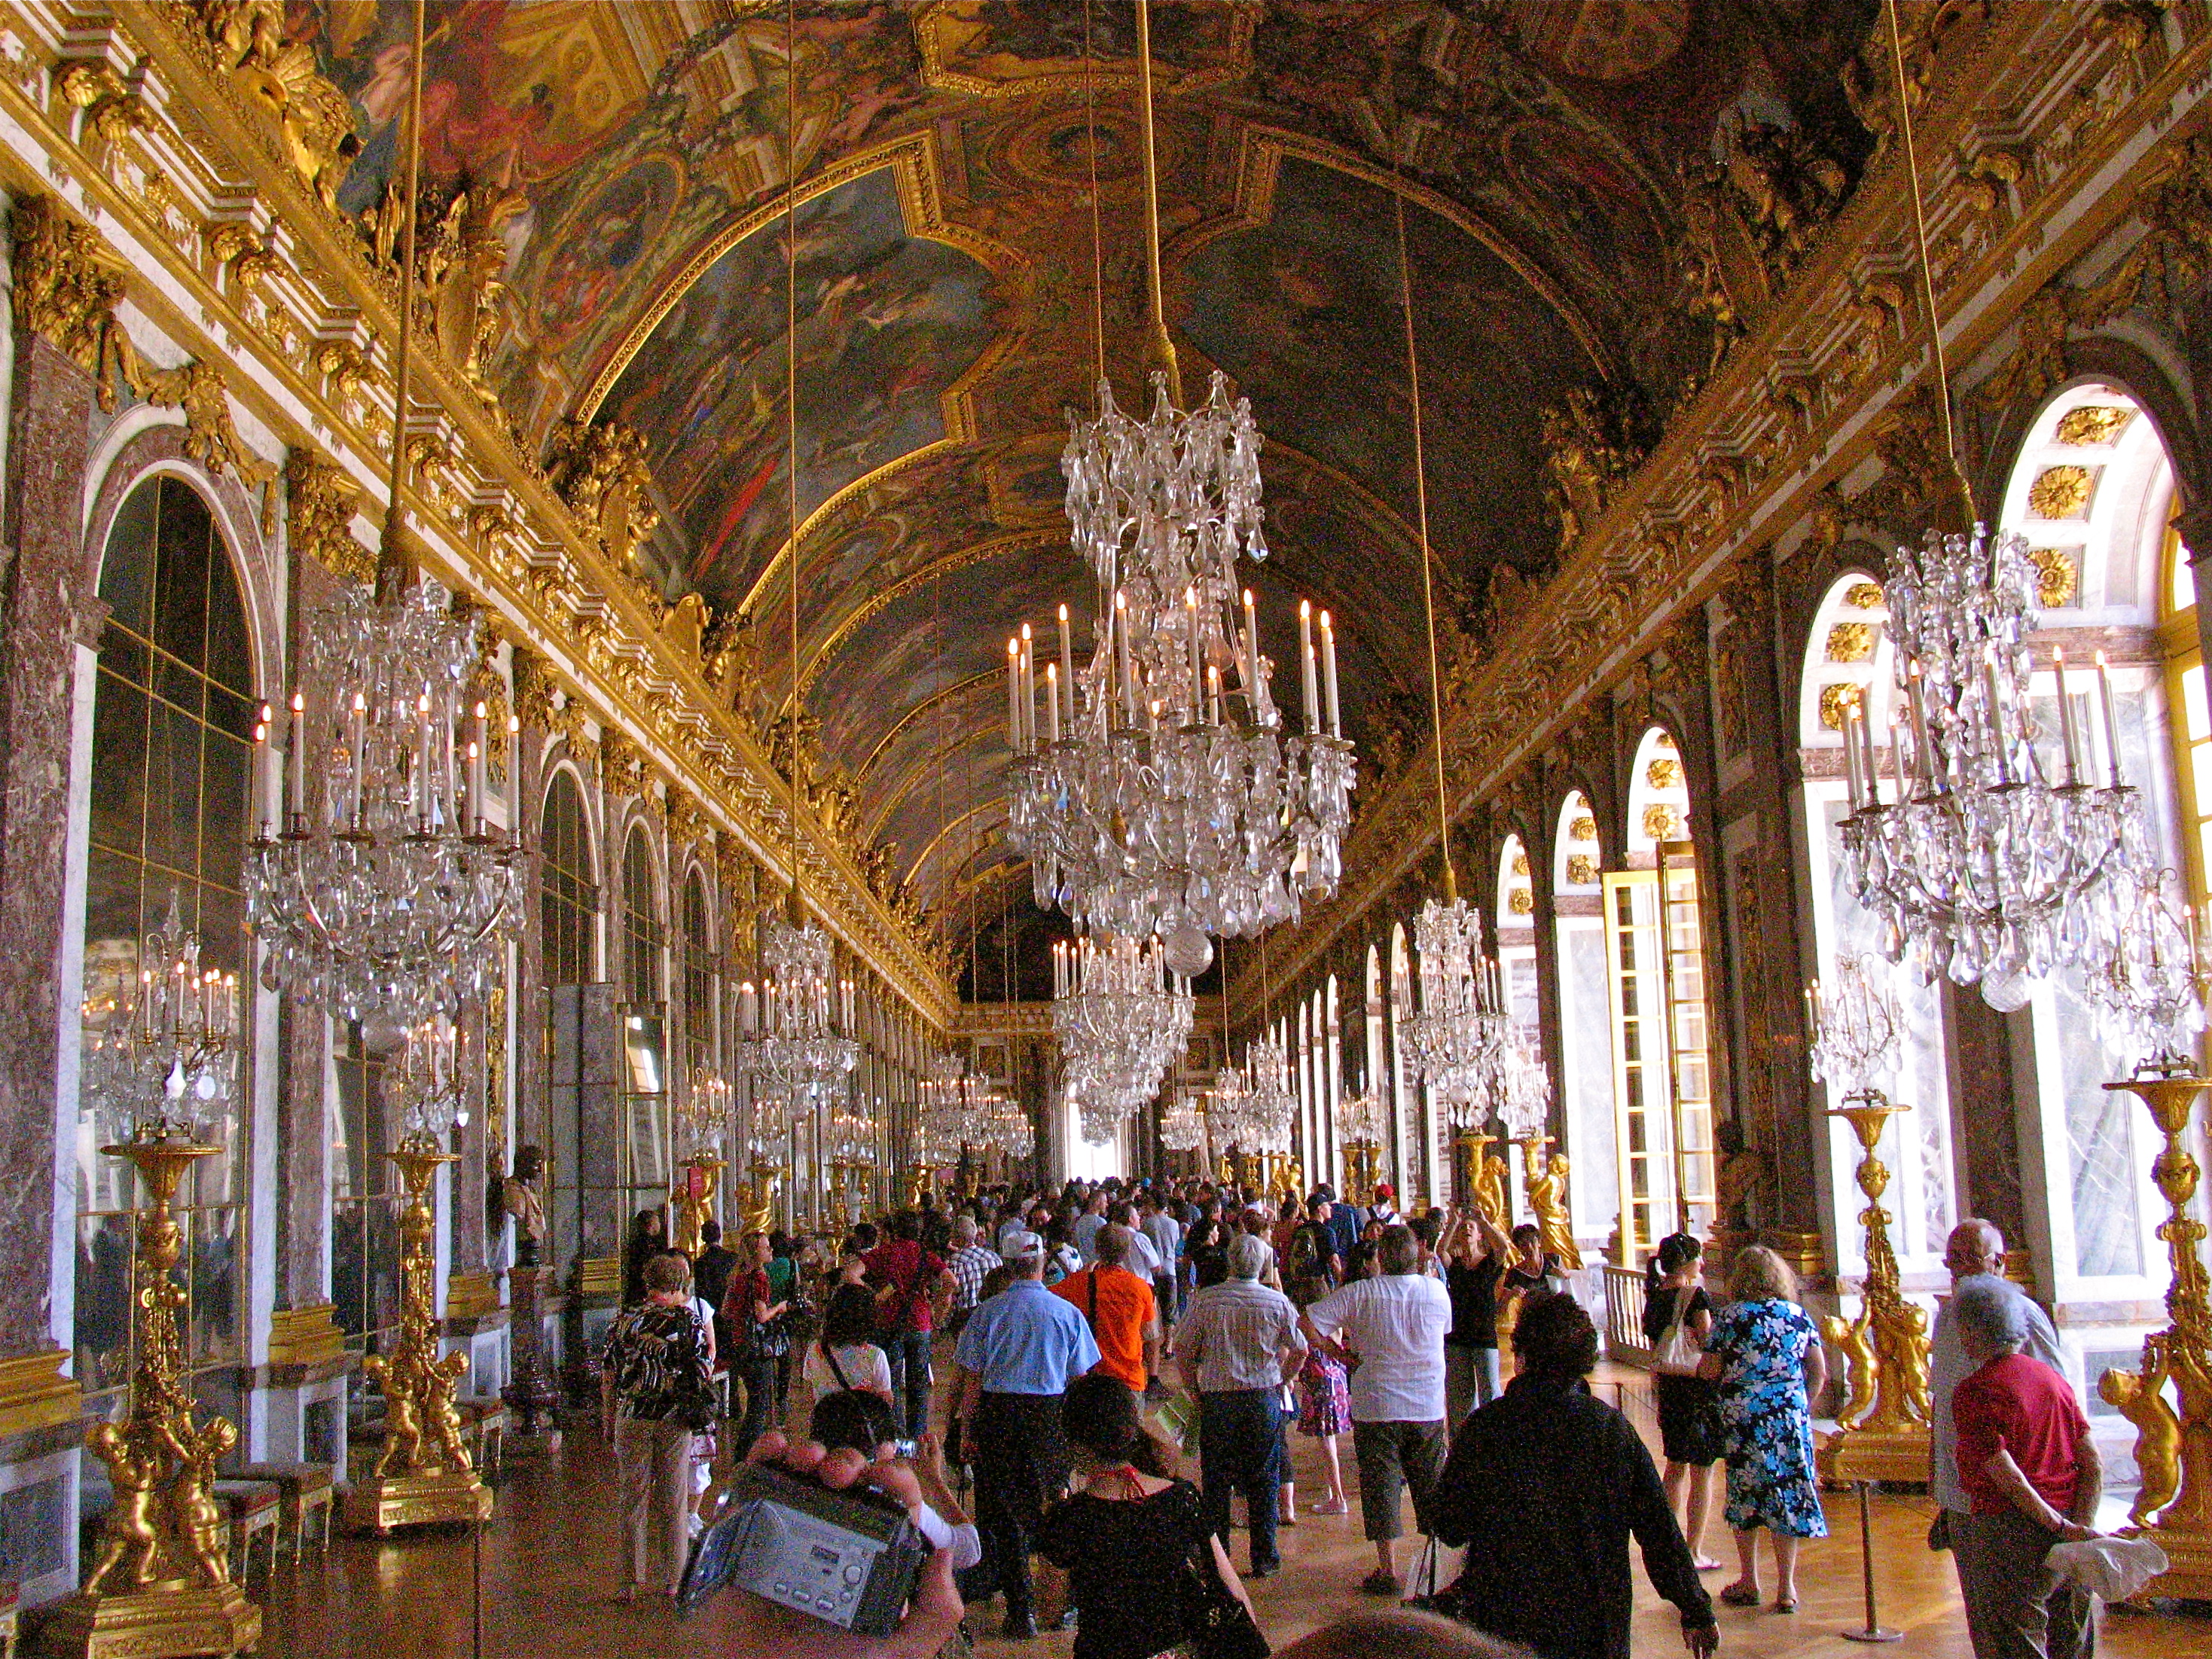 Overlooking the Versailles park, the Hall of Mirrors is the biggest room in the Palace of Versailles.